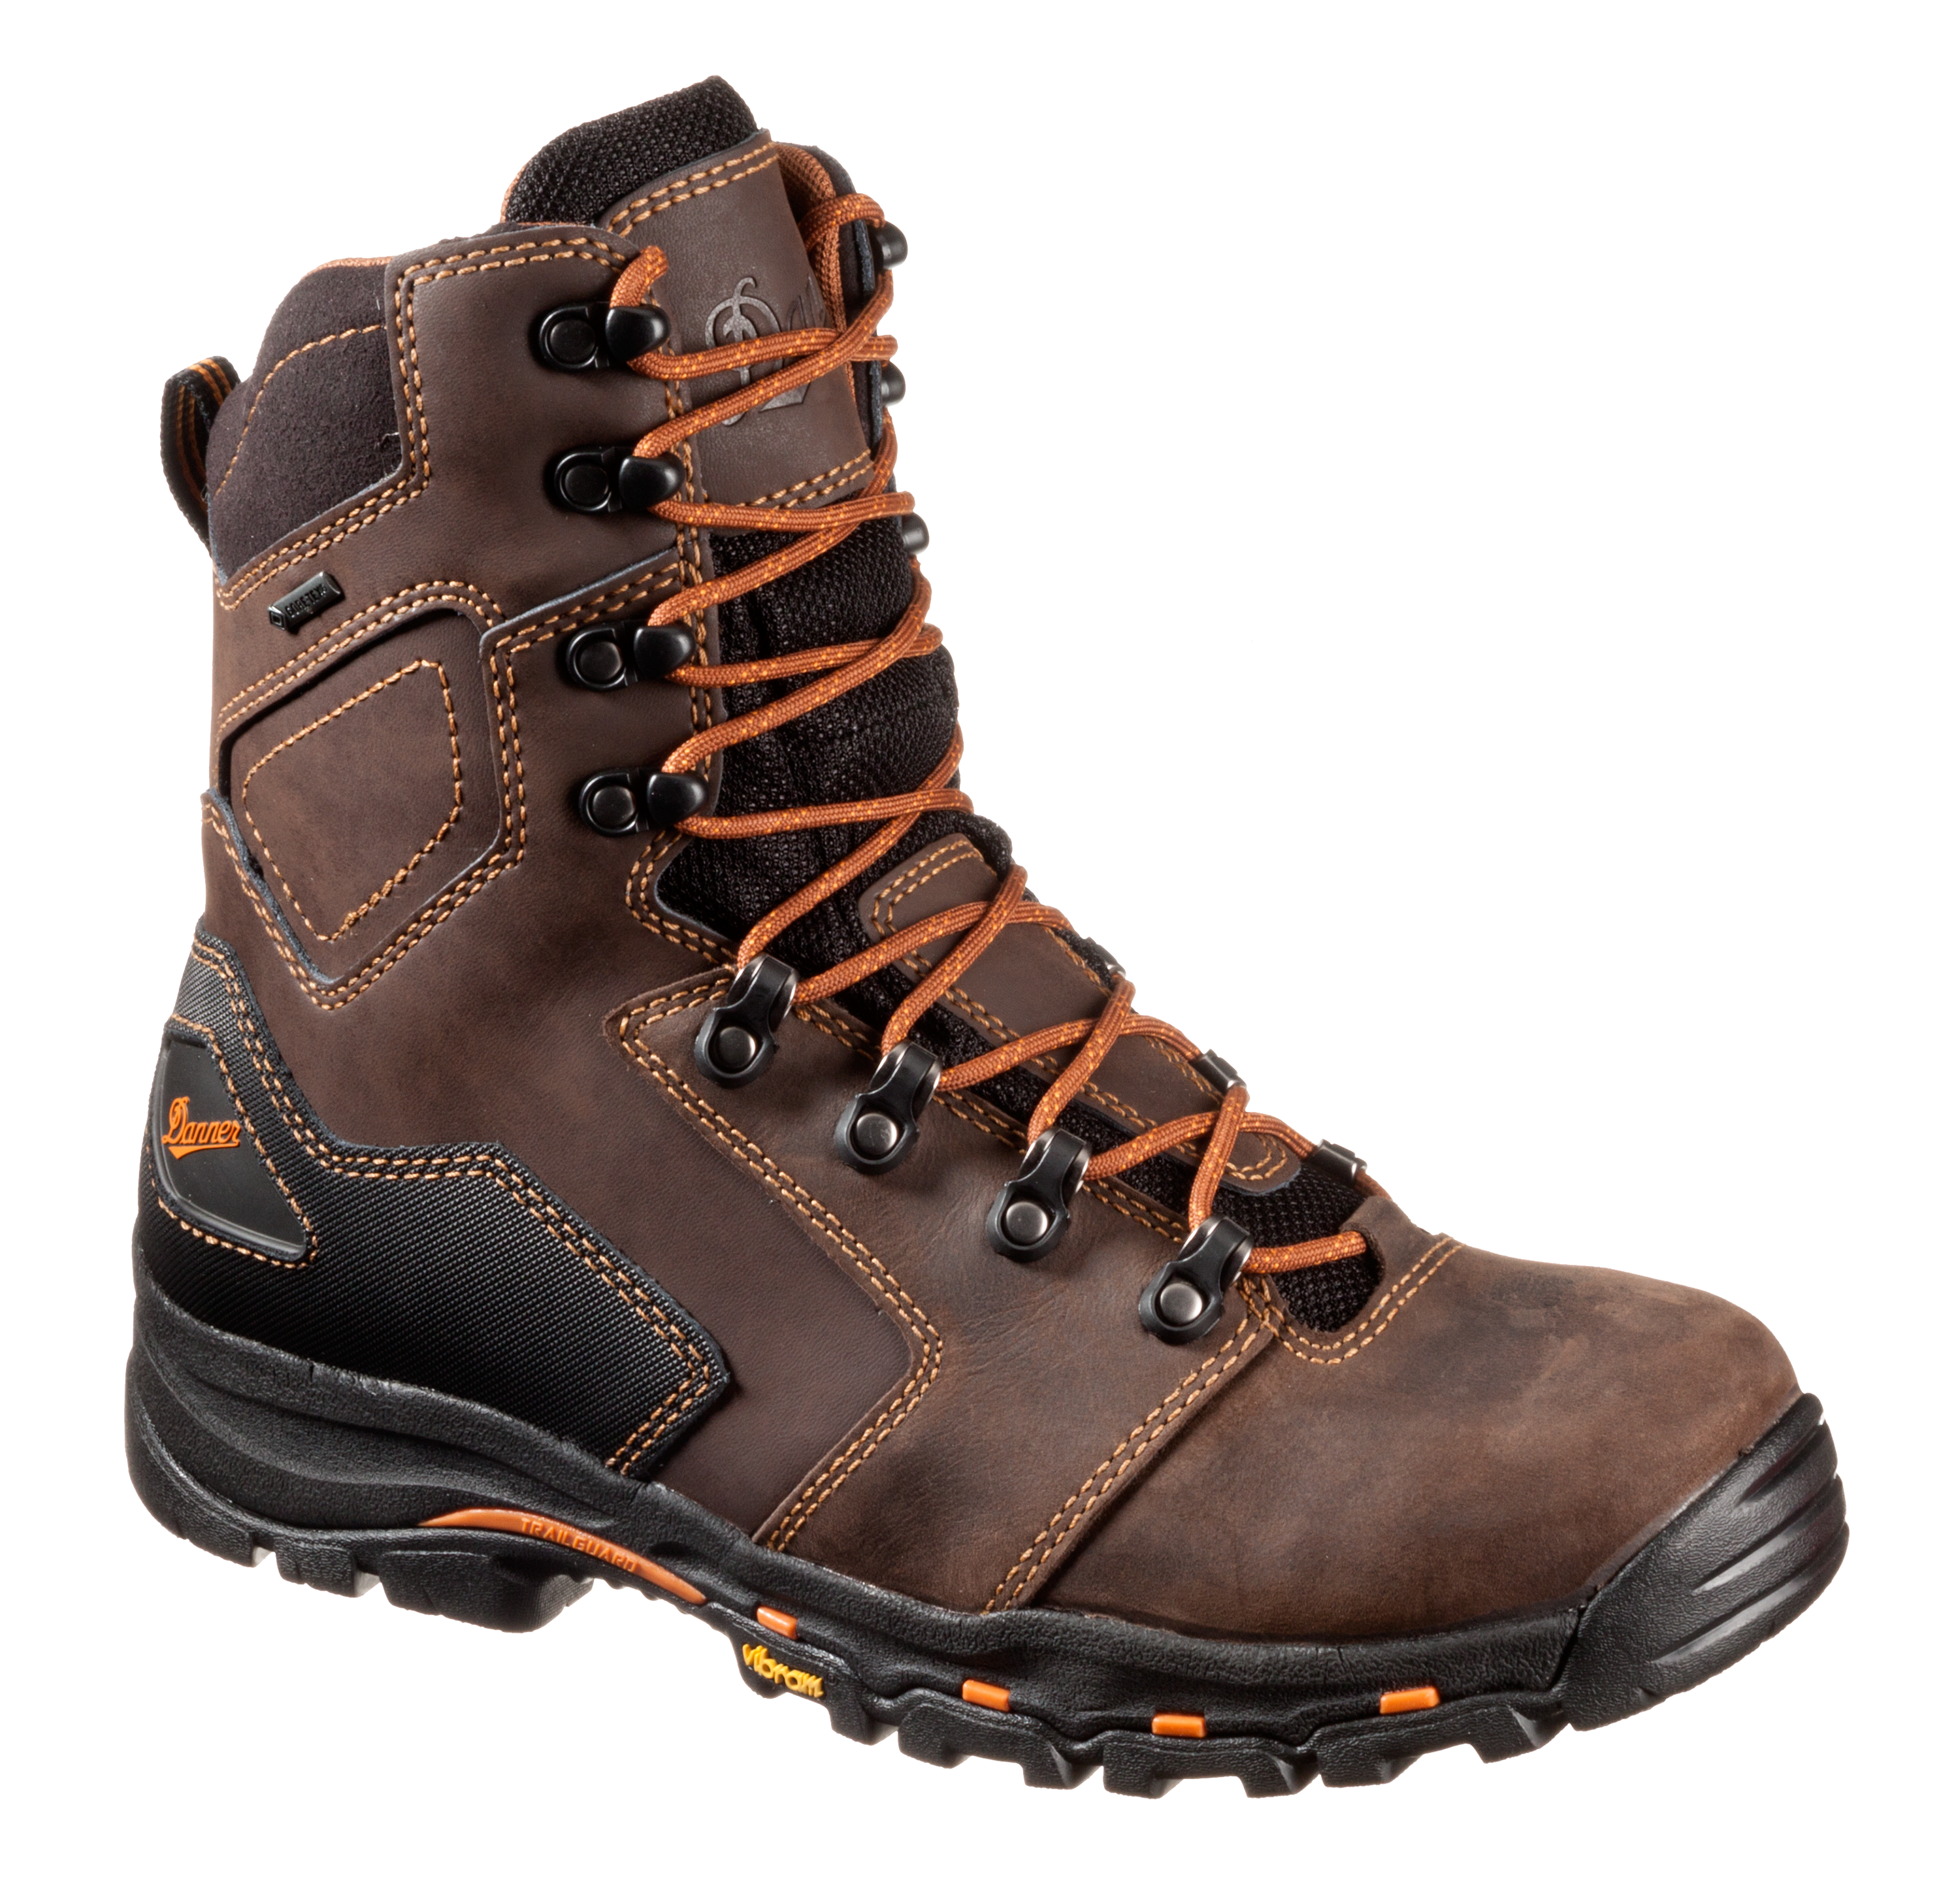 Danner Vicious GORE-TEX Work Boots for Men - Brown - 10.5 W